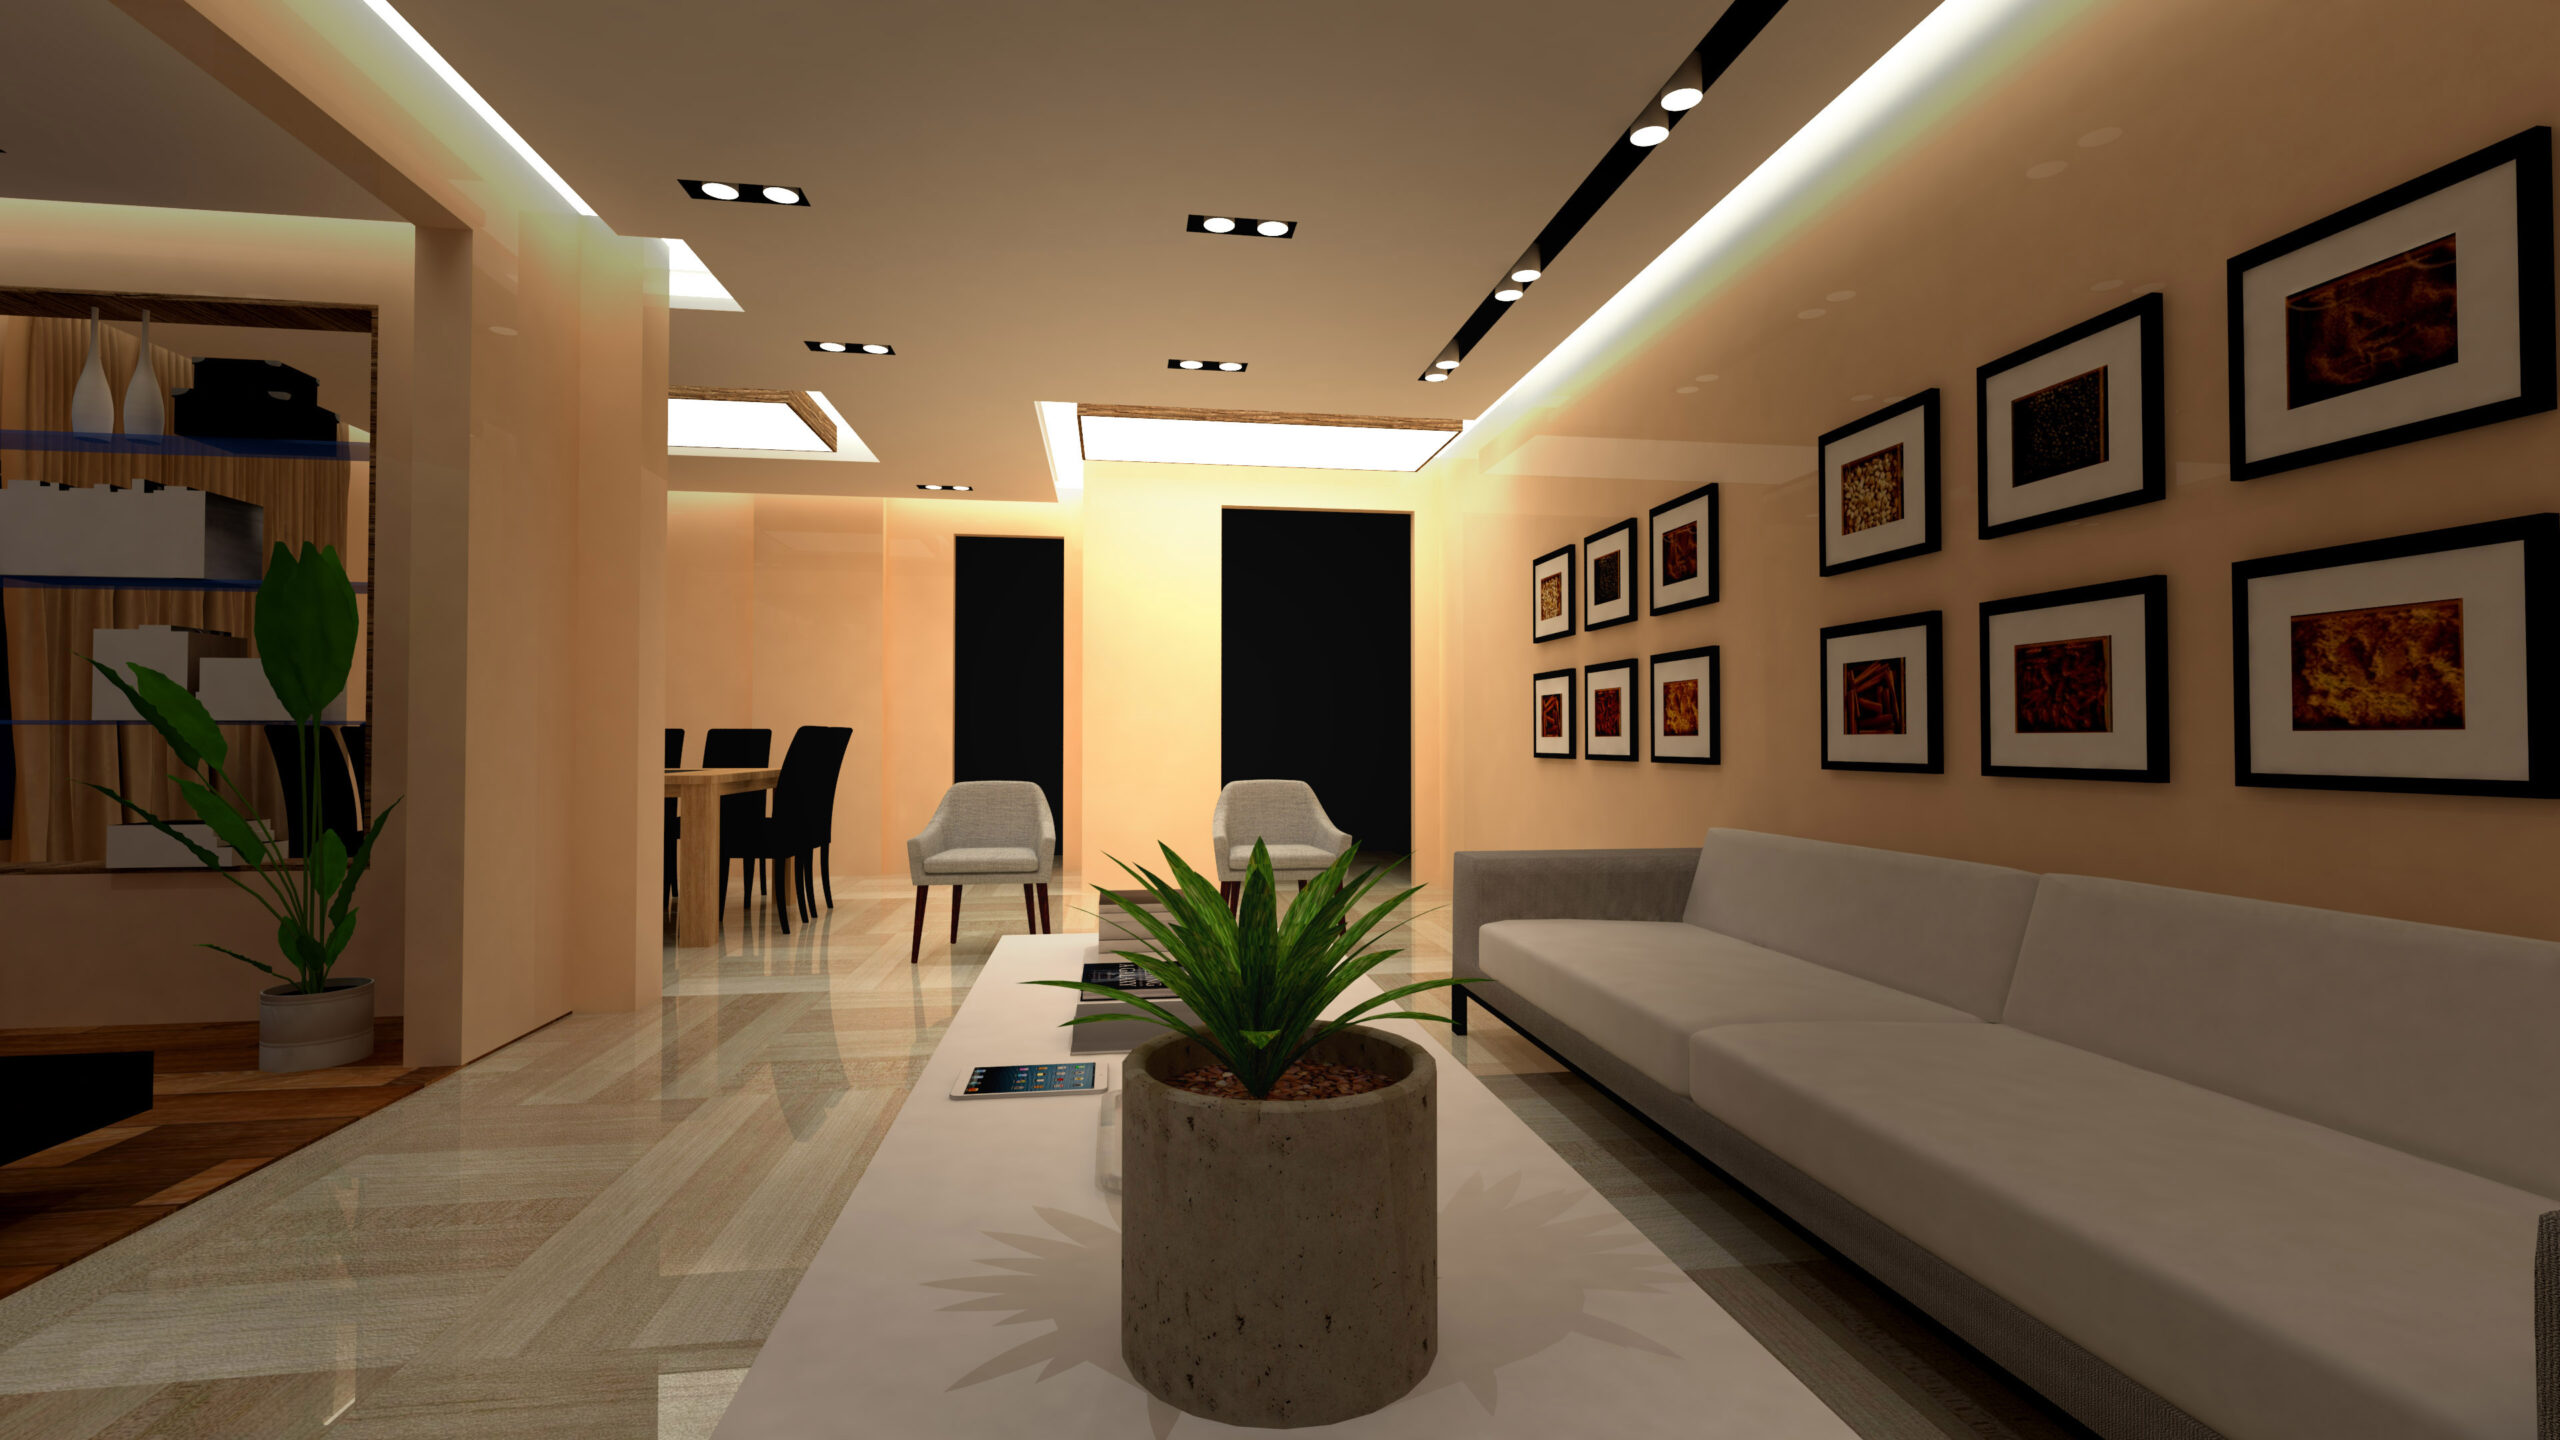 projects_interior_antoun-s-house_object-606ce69485b9a0-48192647_1617749667